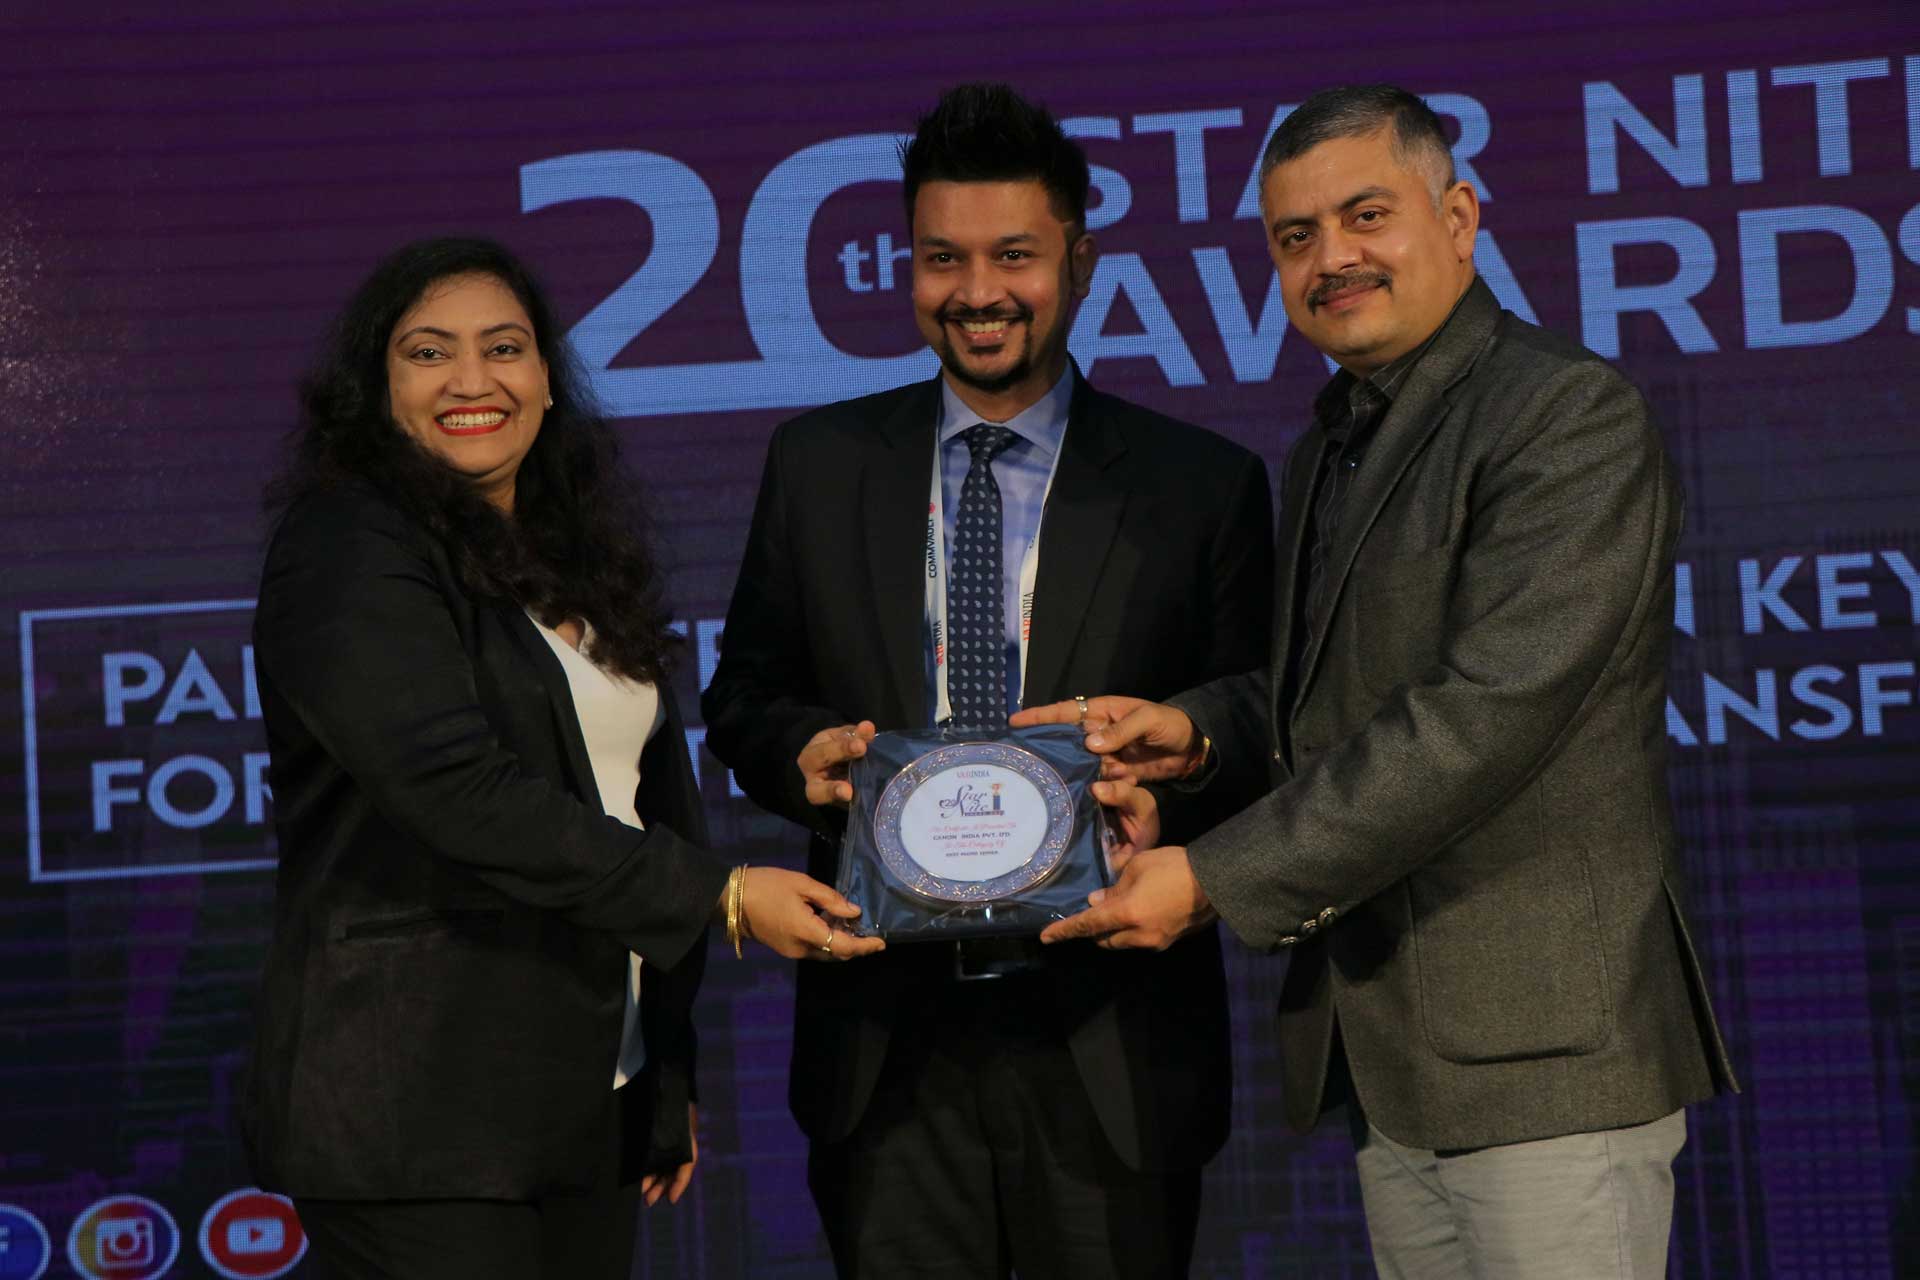 Best Photo Copier Award goes to Canon India Pvt. Ltd. at 20th Star Nite Awards 2021